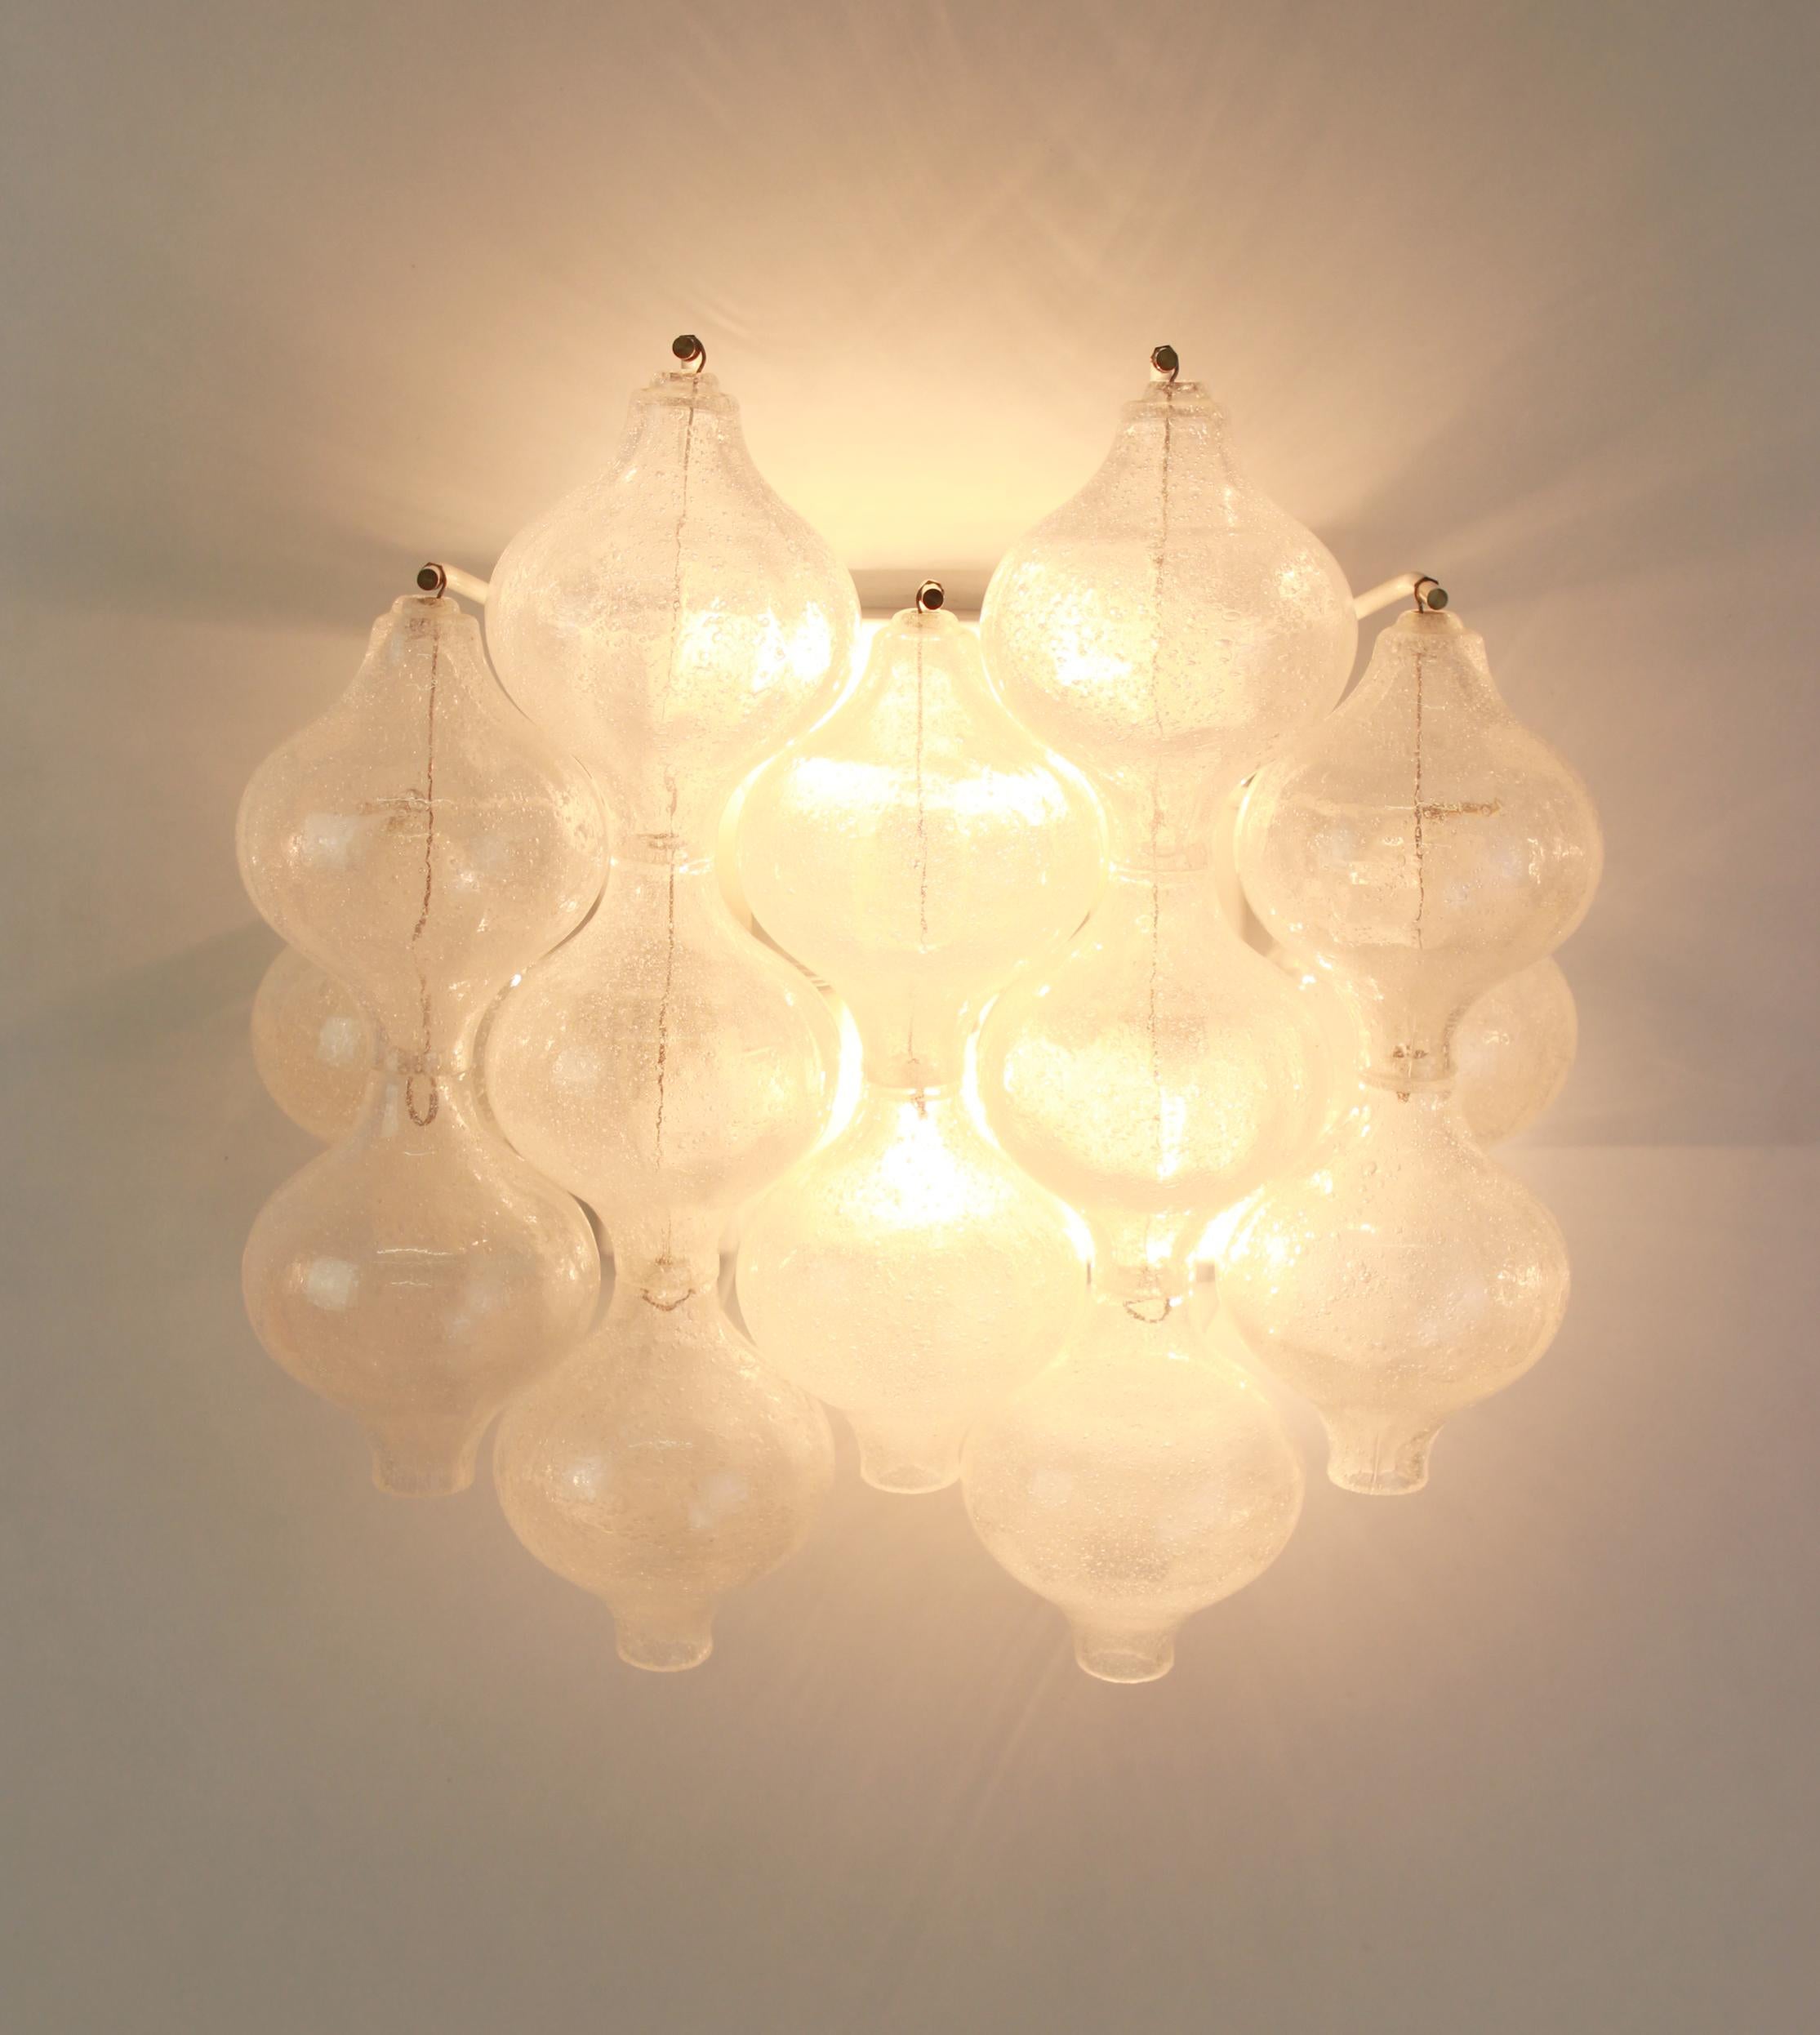 1 of 4 Pairs of Large Kalmar 'Tulipan' Sconces Wall Lights, Austria, 1970s For Sale 5